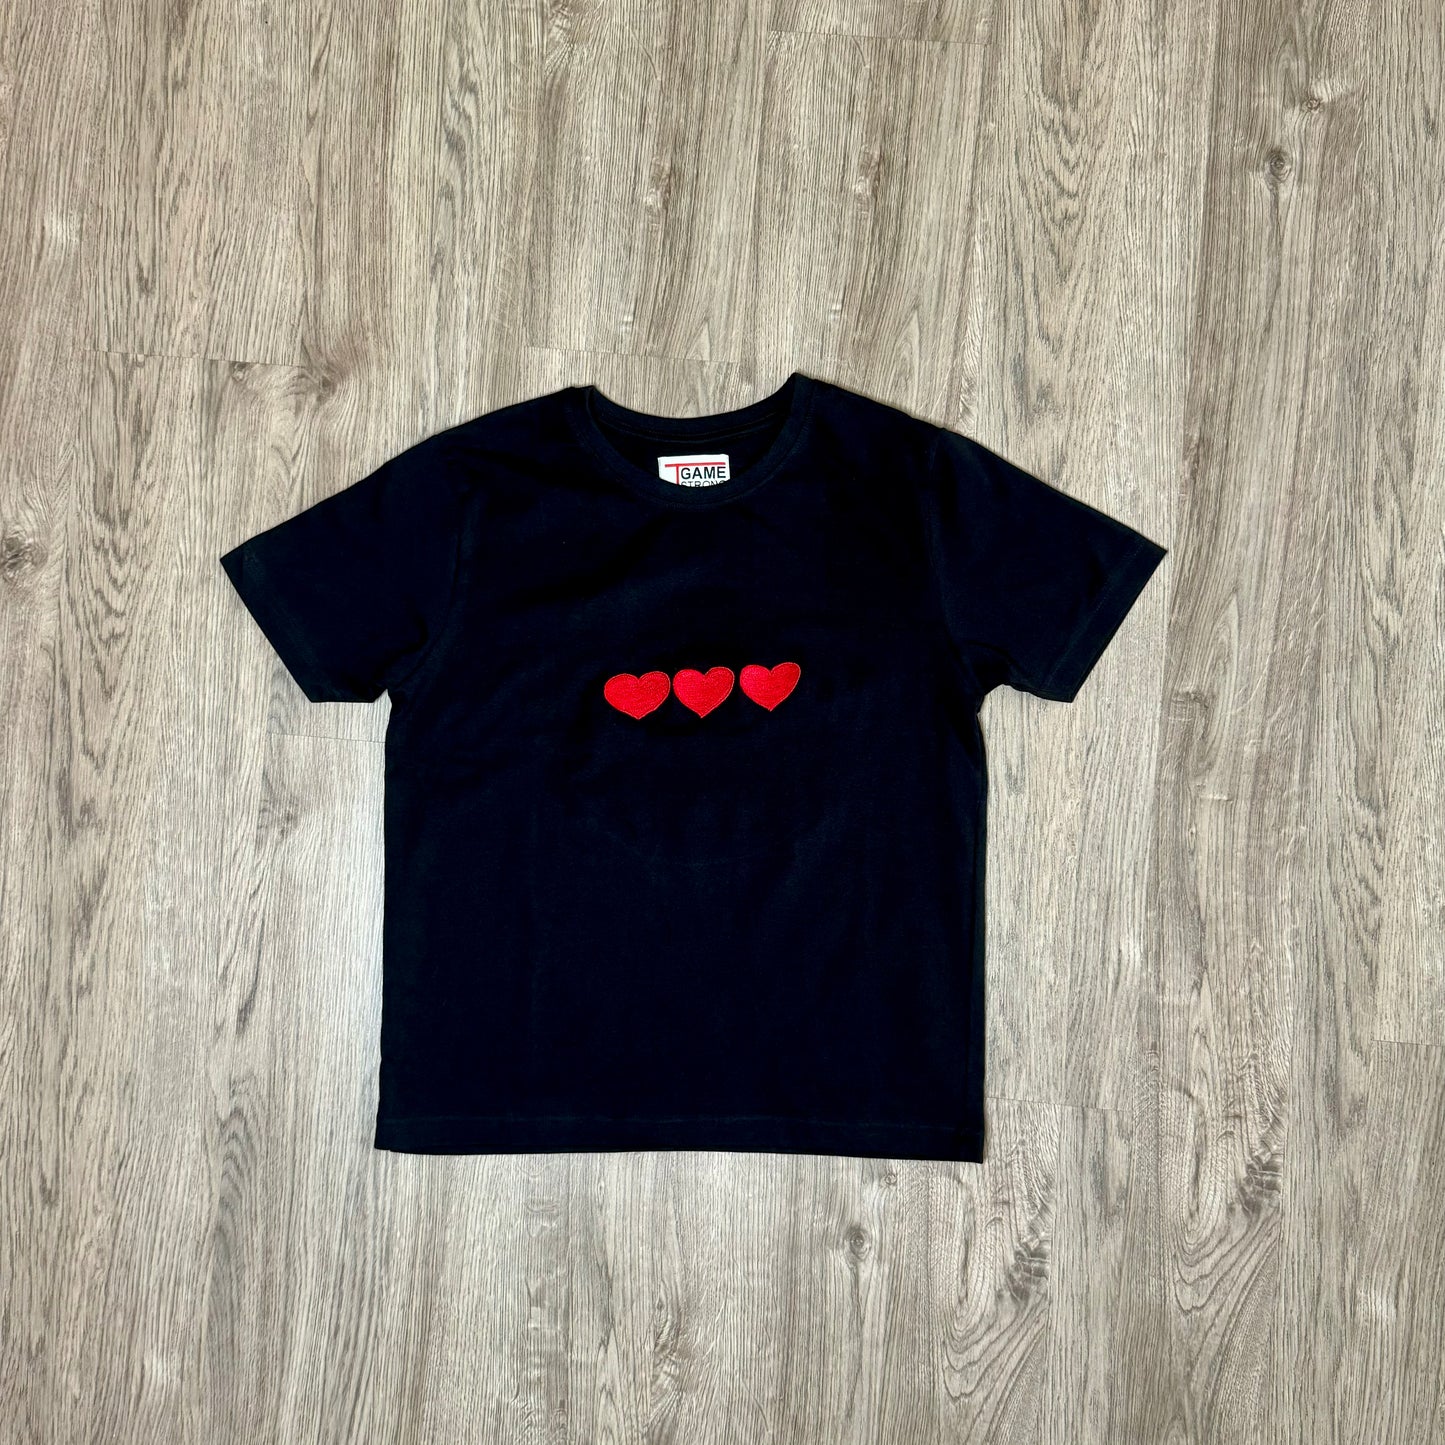 Embroidered Hearts Black Tee